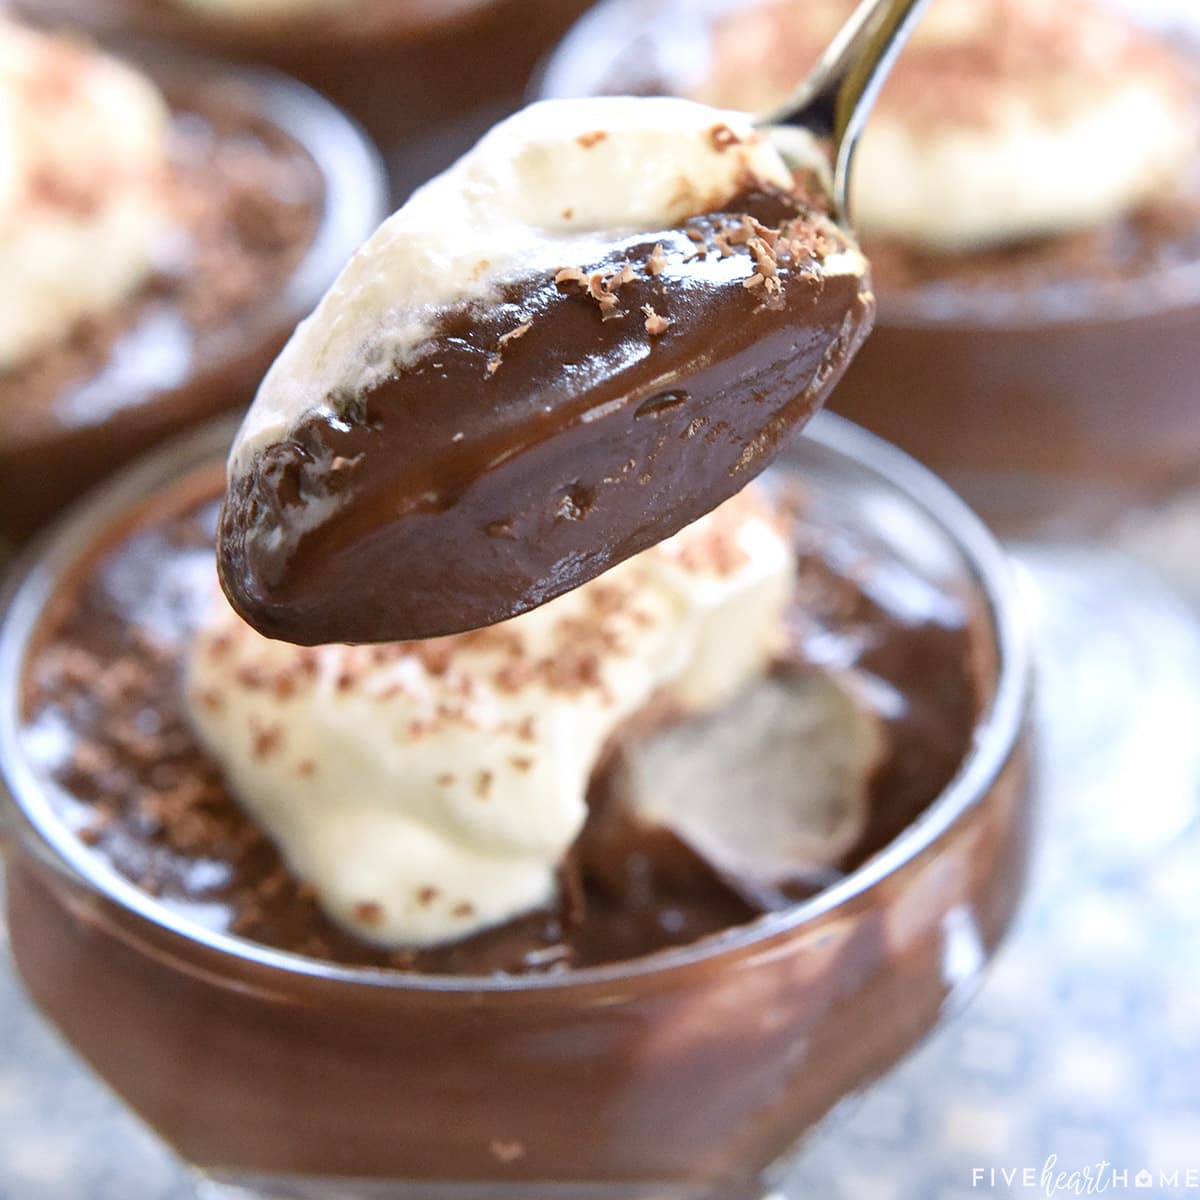 Homemade Chocolate Pudding in bowl and on spoon.